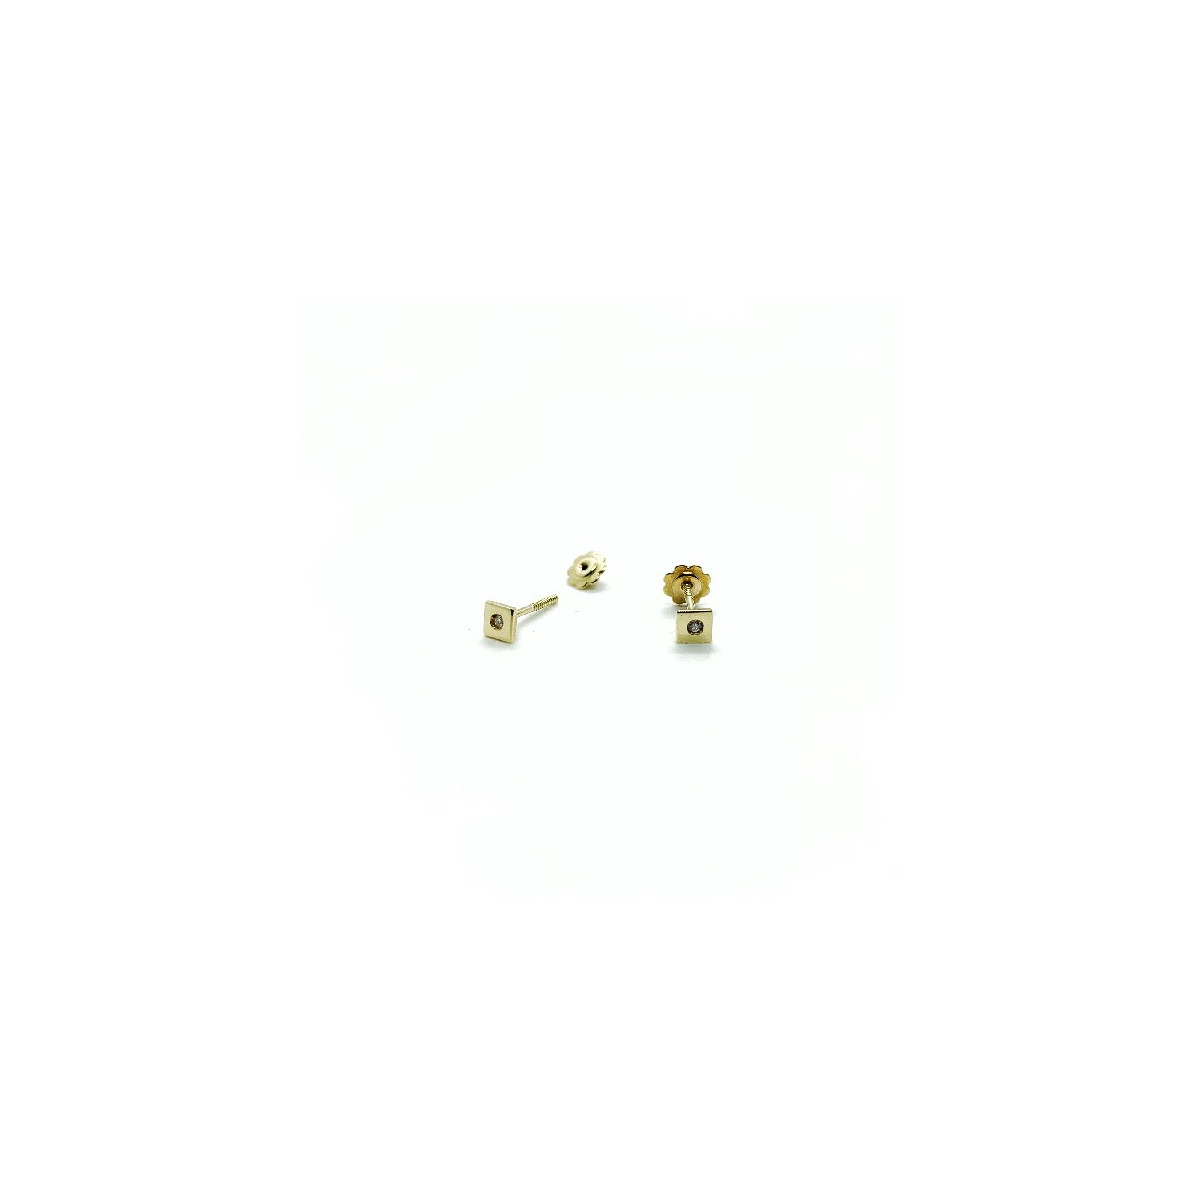 SQUARE CLIMENT 1890 BABY EARRINGS - D-326R/BR